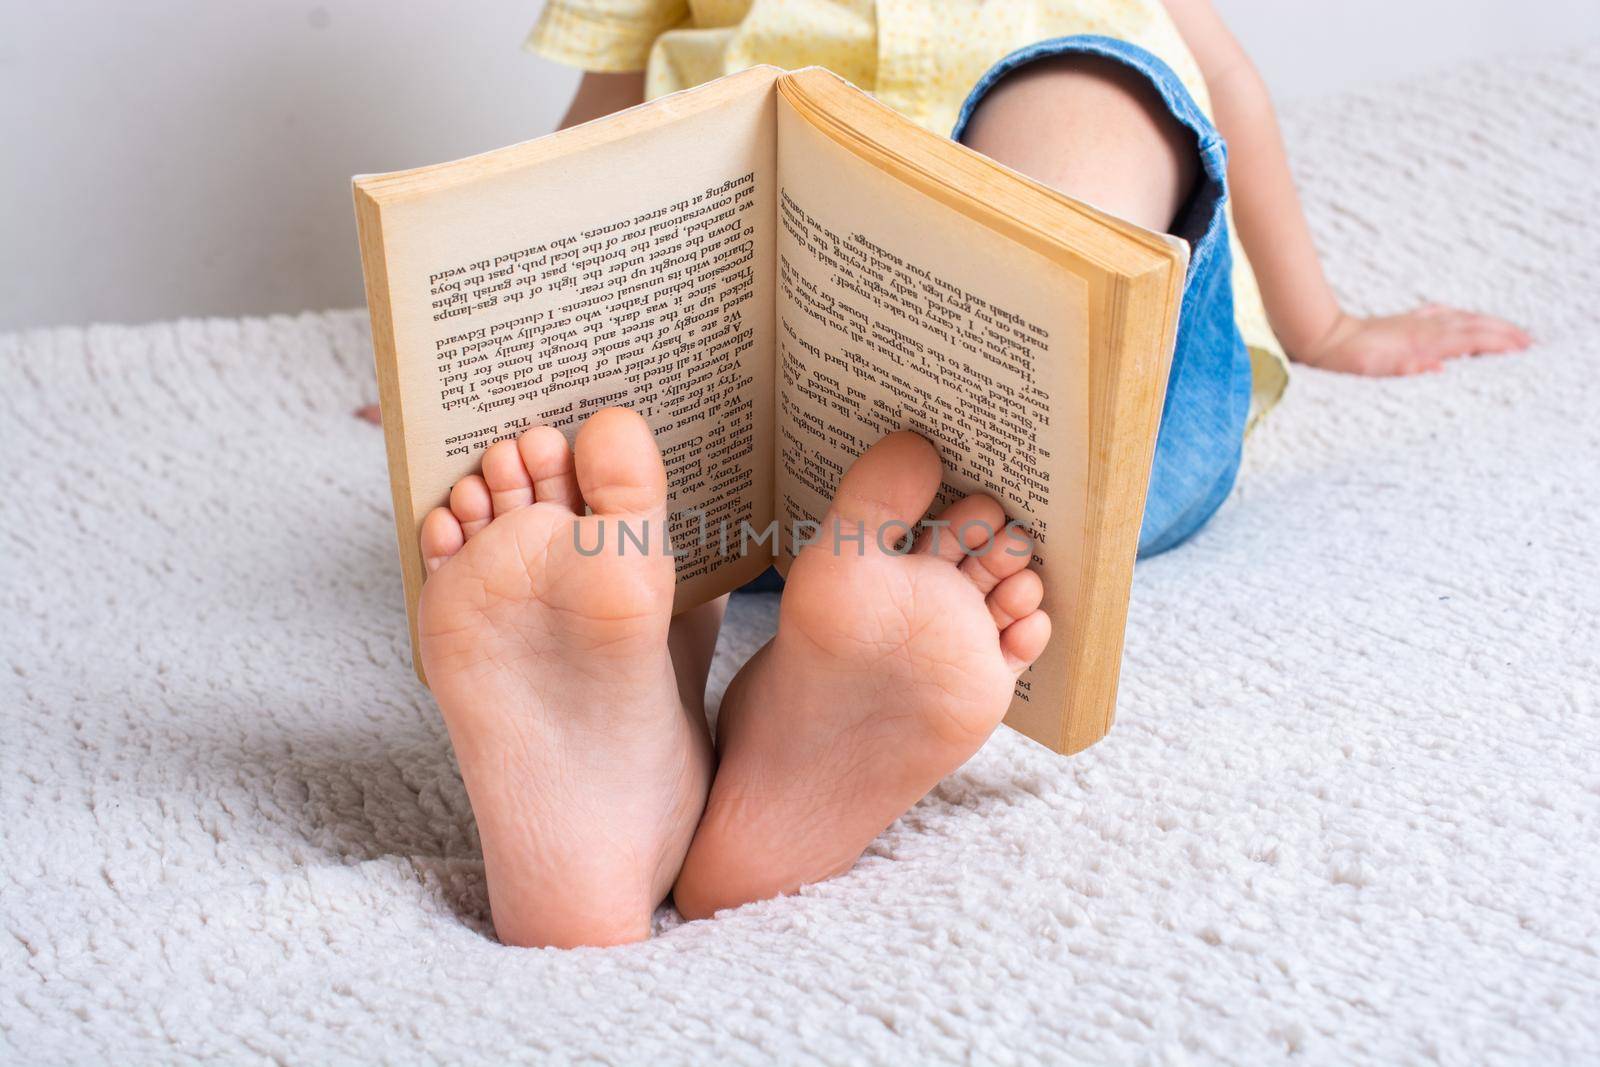 Boy with book on feet  as education concept